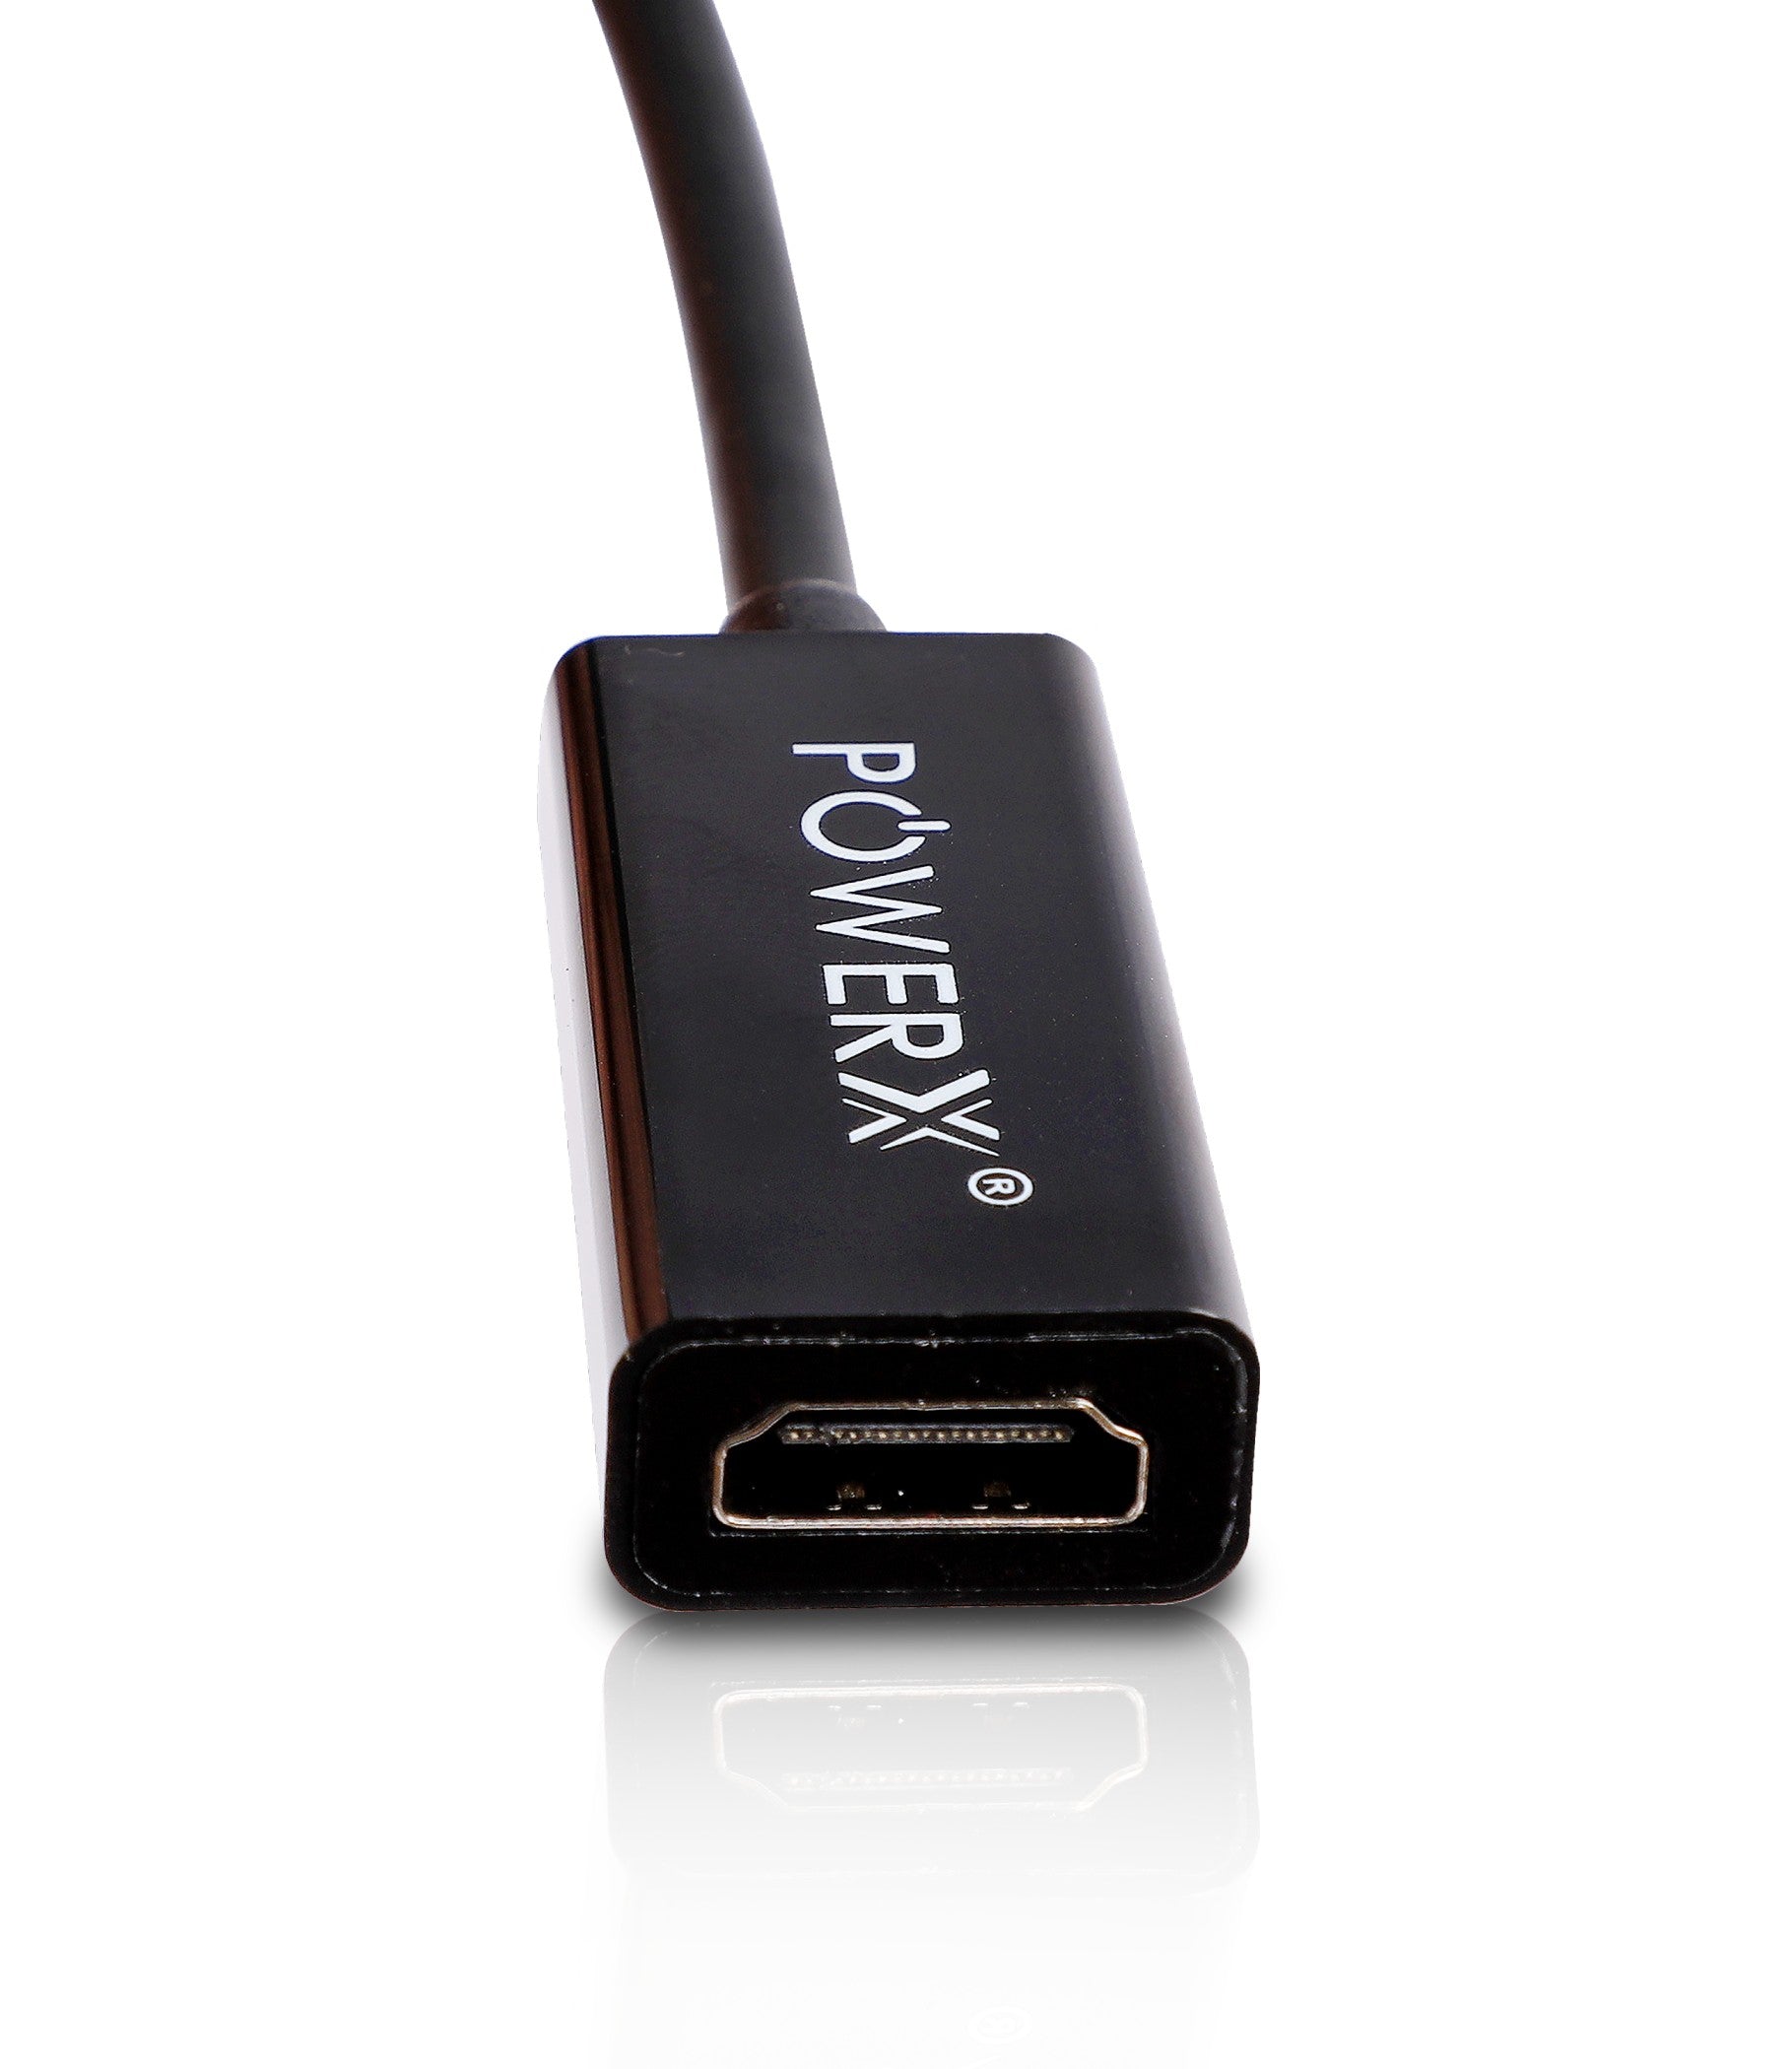 POWERX DP TO HDMI CABLE ADAPTER